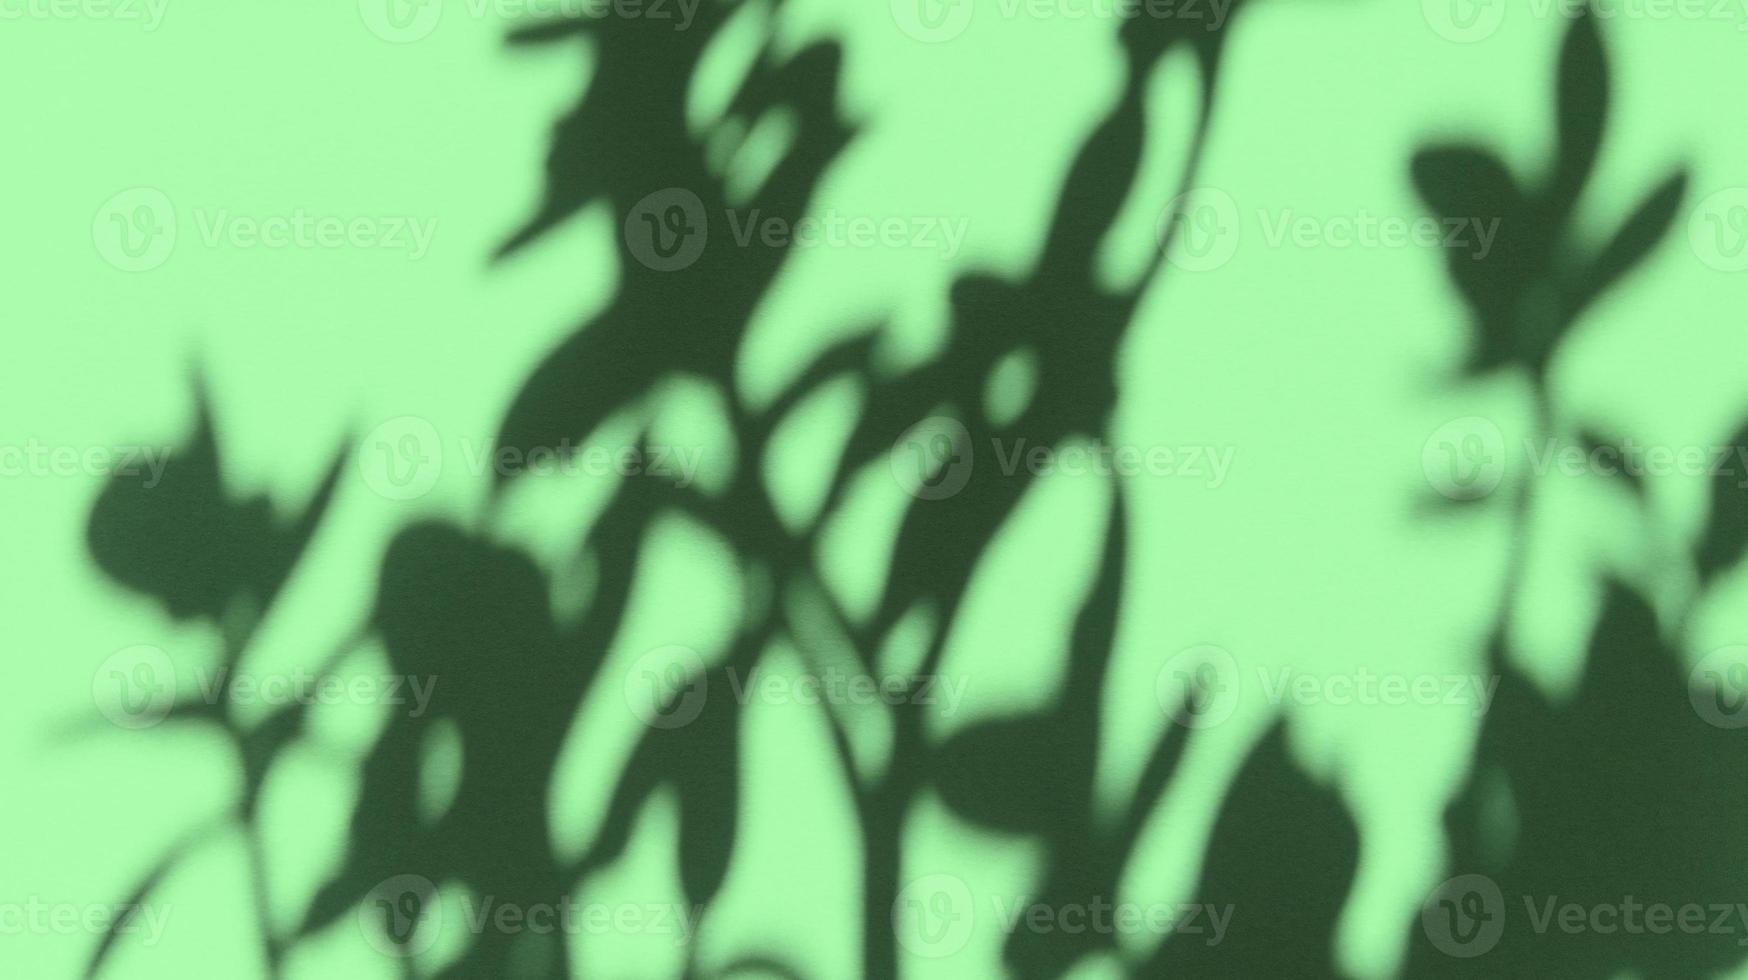 Leaves shadows on green pastel texture paper. Abstract backgorund. Stock photo. photo